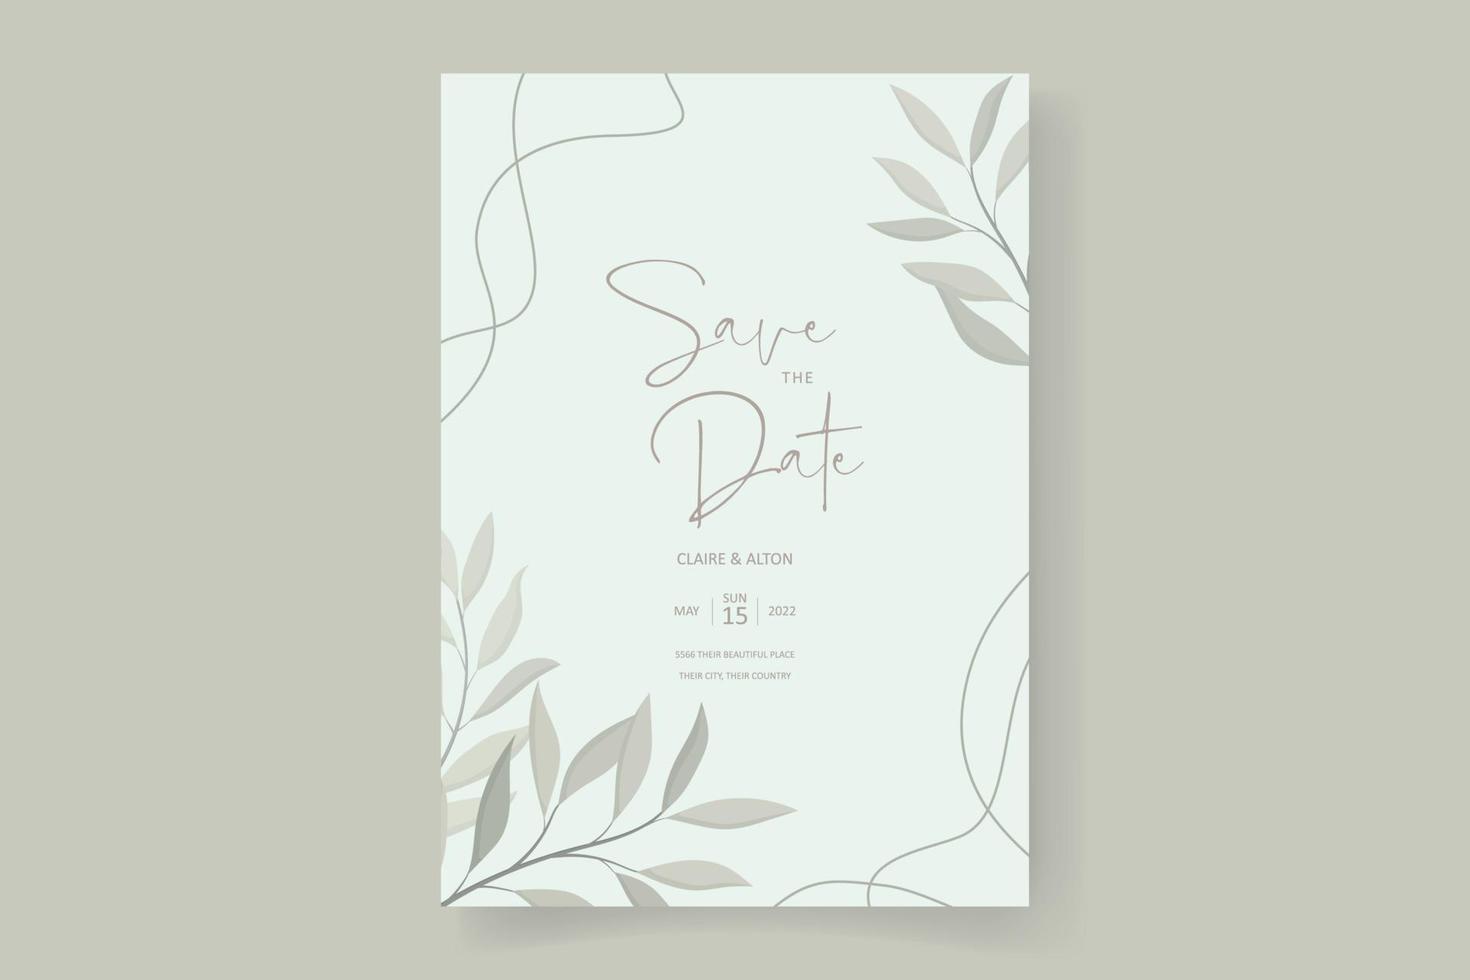 Wedding invitation card template with beautiful leaf ornament vector